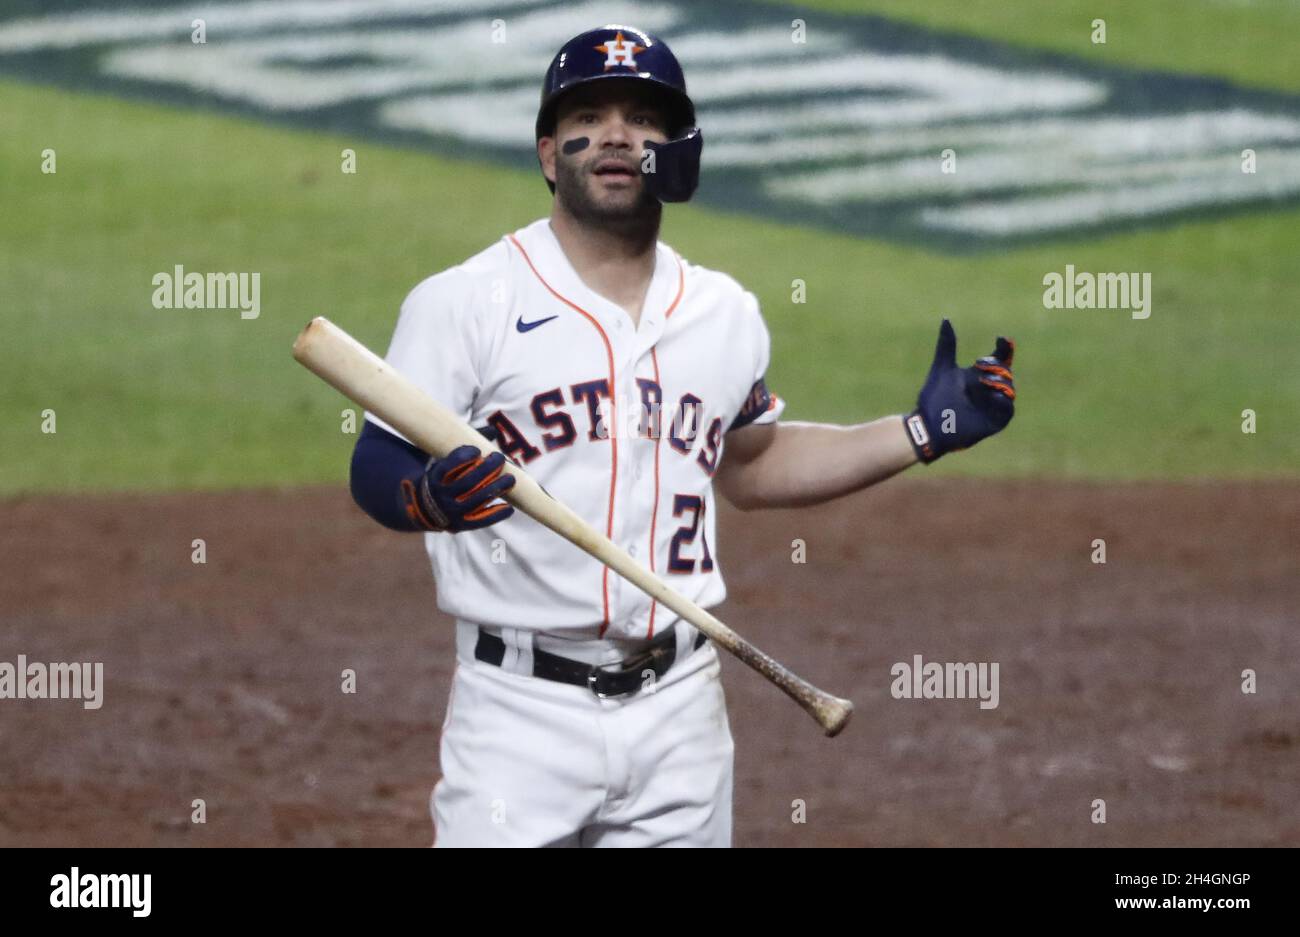 Houston, United States. 02nd Nov, 2021. Houston Astros second baseman Jose Altuve reacts after a swinging strikeout to end the eighth inning against the Atlanta Braves in game six in the MLB World Series at Minute Maid Park on Tuesday, November 2, 2021 in Houston, Texas. Houston returns home facing elimination trailing Atlanta 3-2 in the series. Photo by Johnny Angelillo/UPI Credit: UPI/Alamy Live News Stock Photo